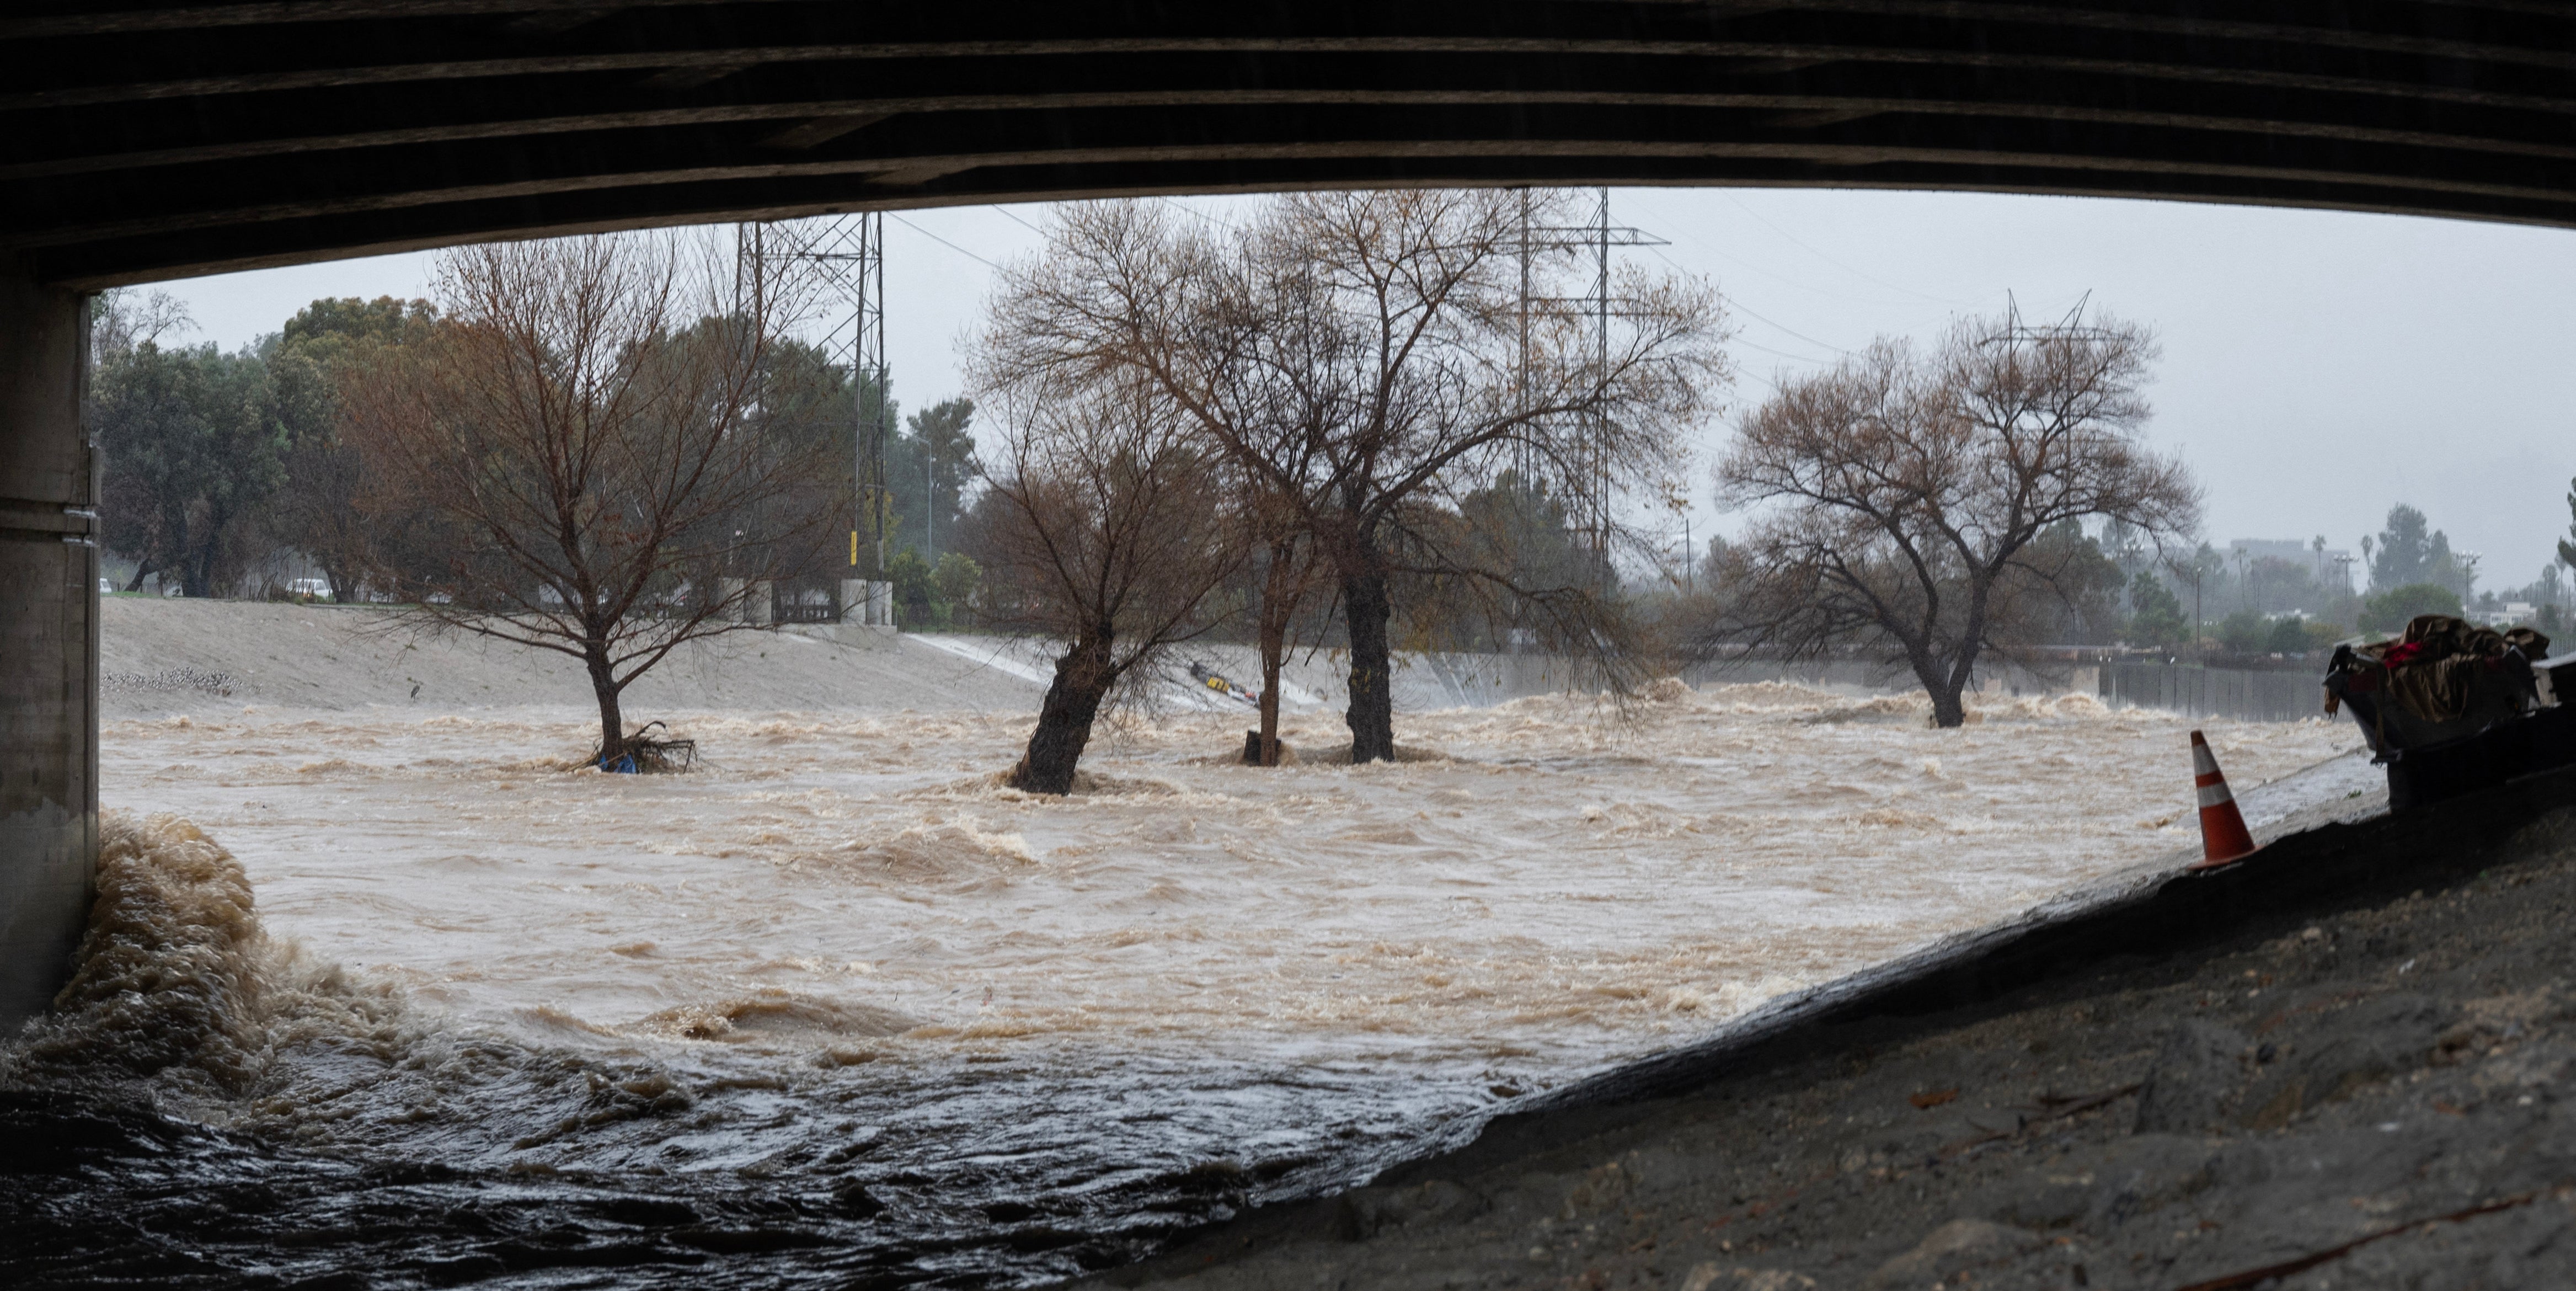 Floodwaters rush through an underpass in Los Angeles, California on Monday